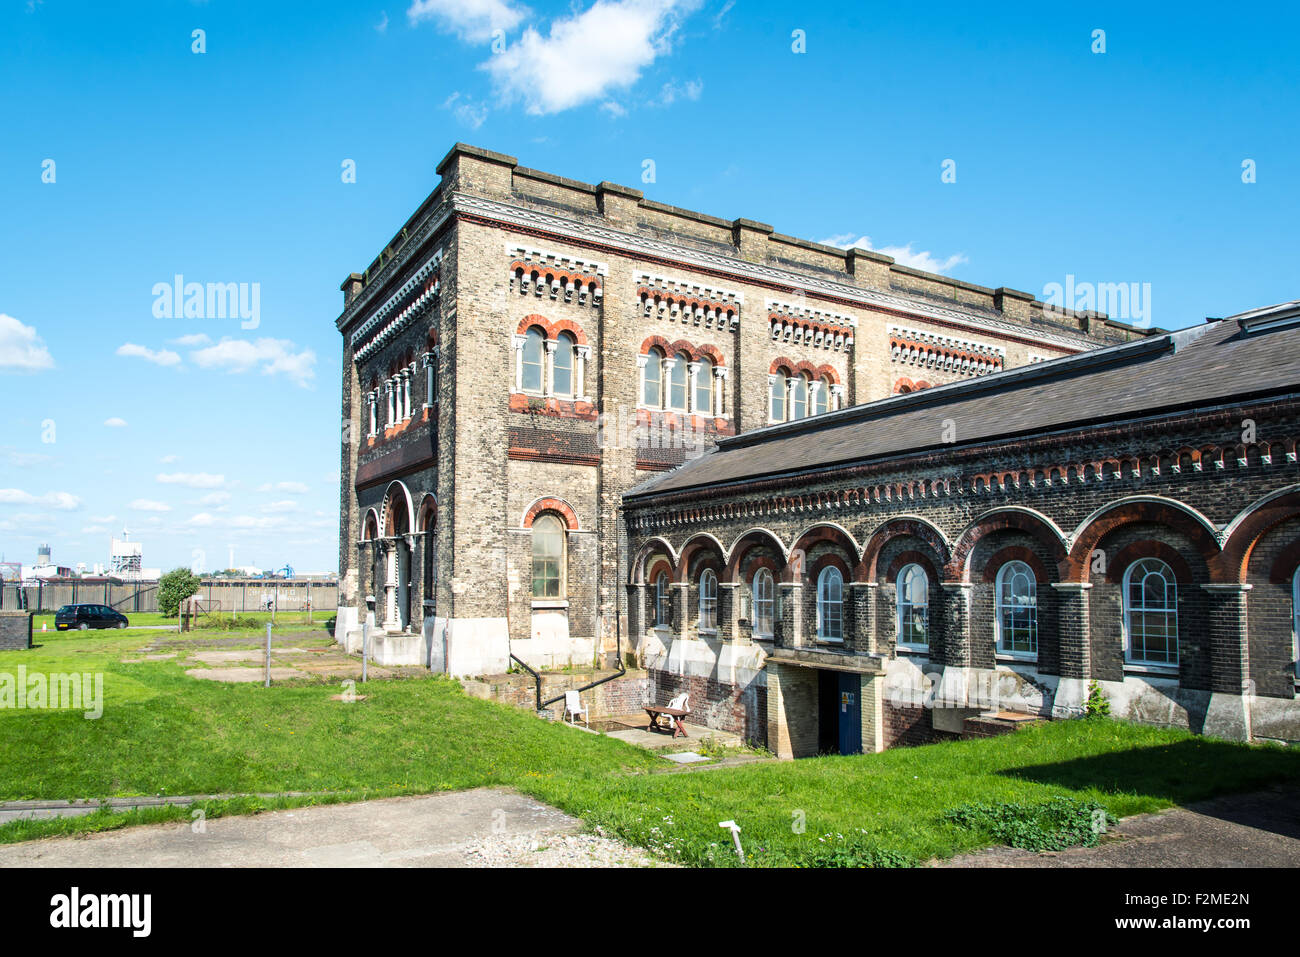 Exterior of the Crossness Sewage Pumping Station, Bexley, London. Stock Photo